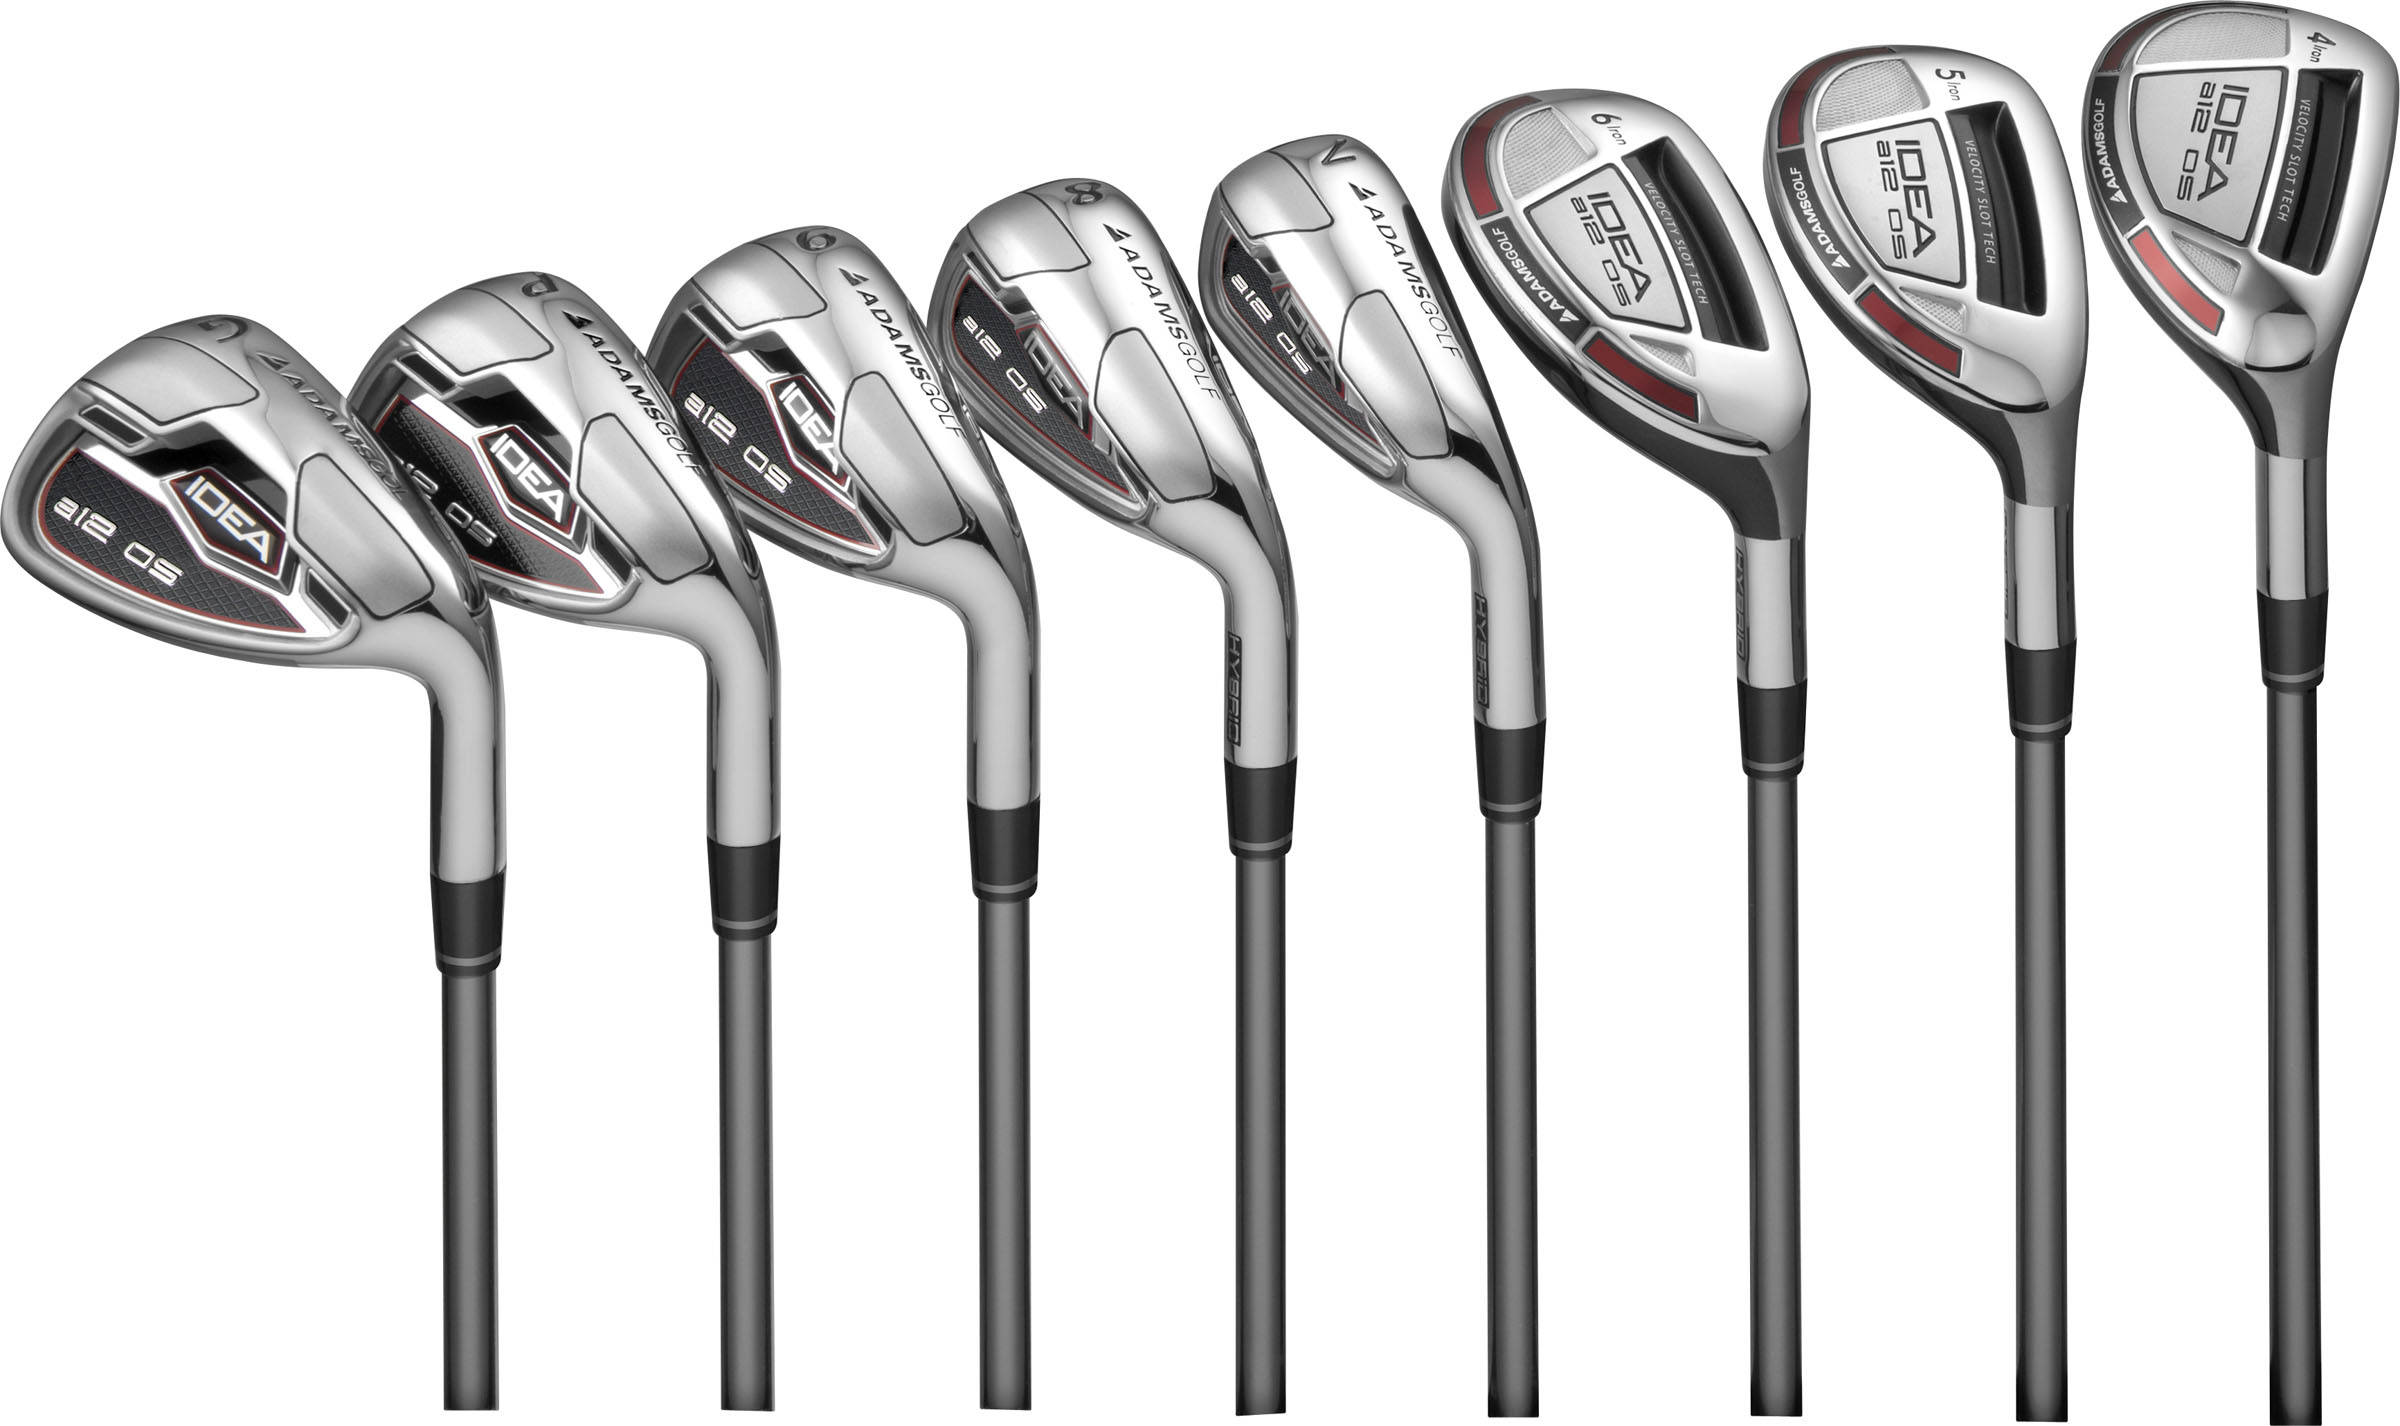 Picture Of Golf Clubs - ClipArt Best